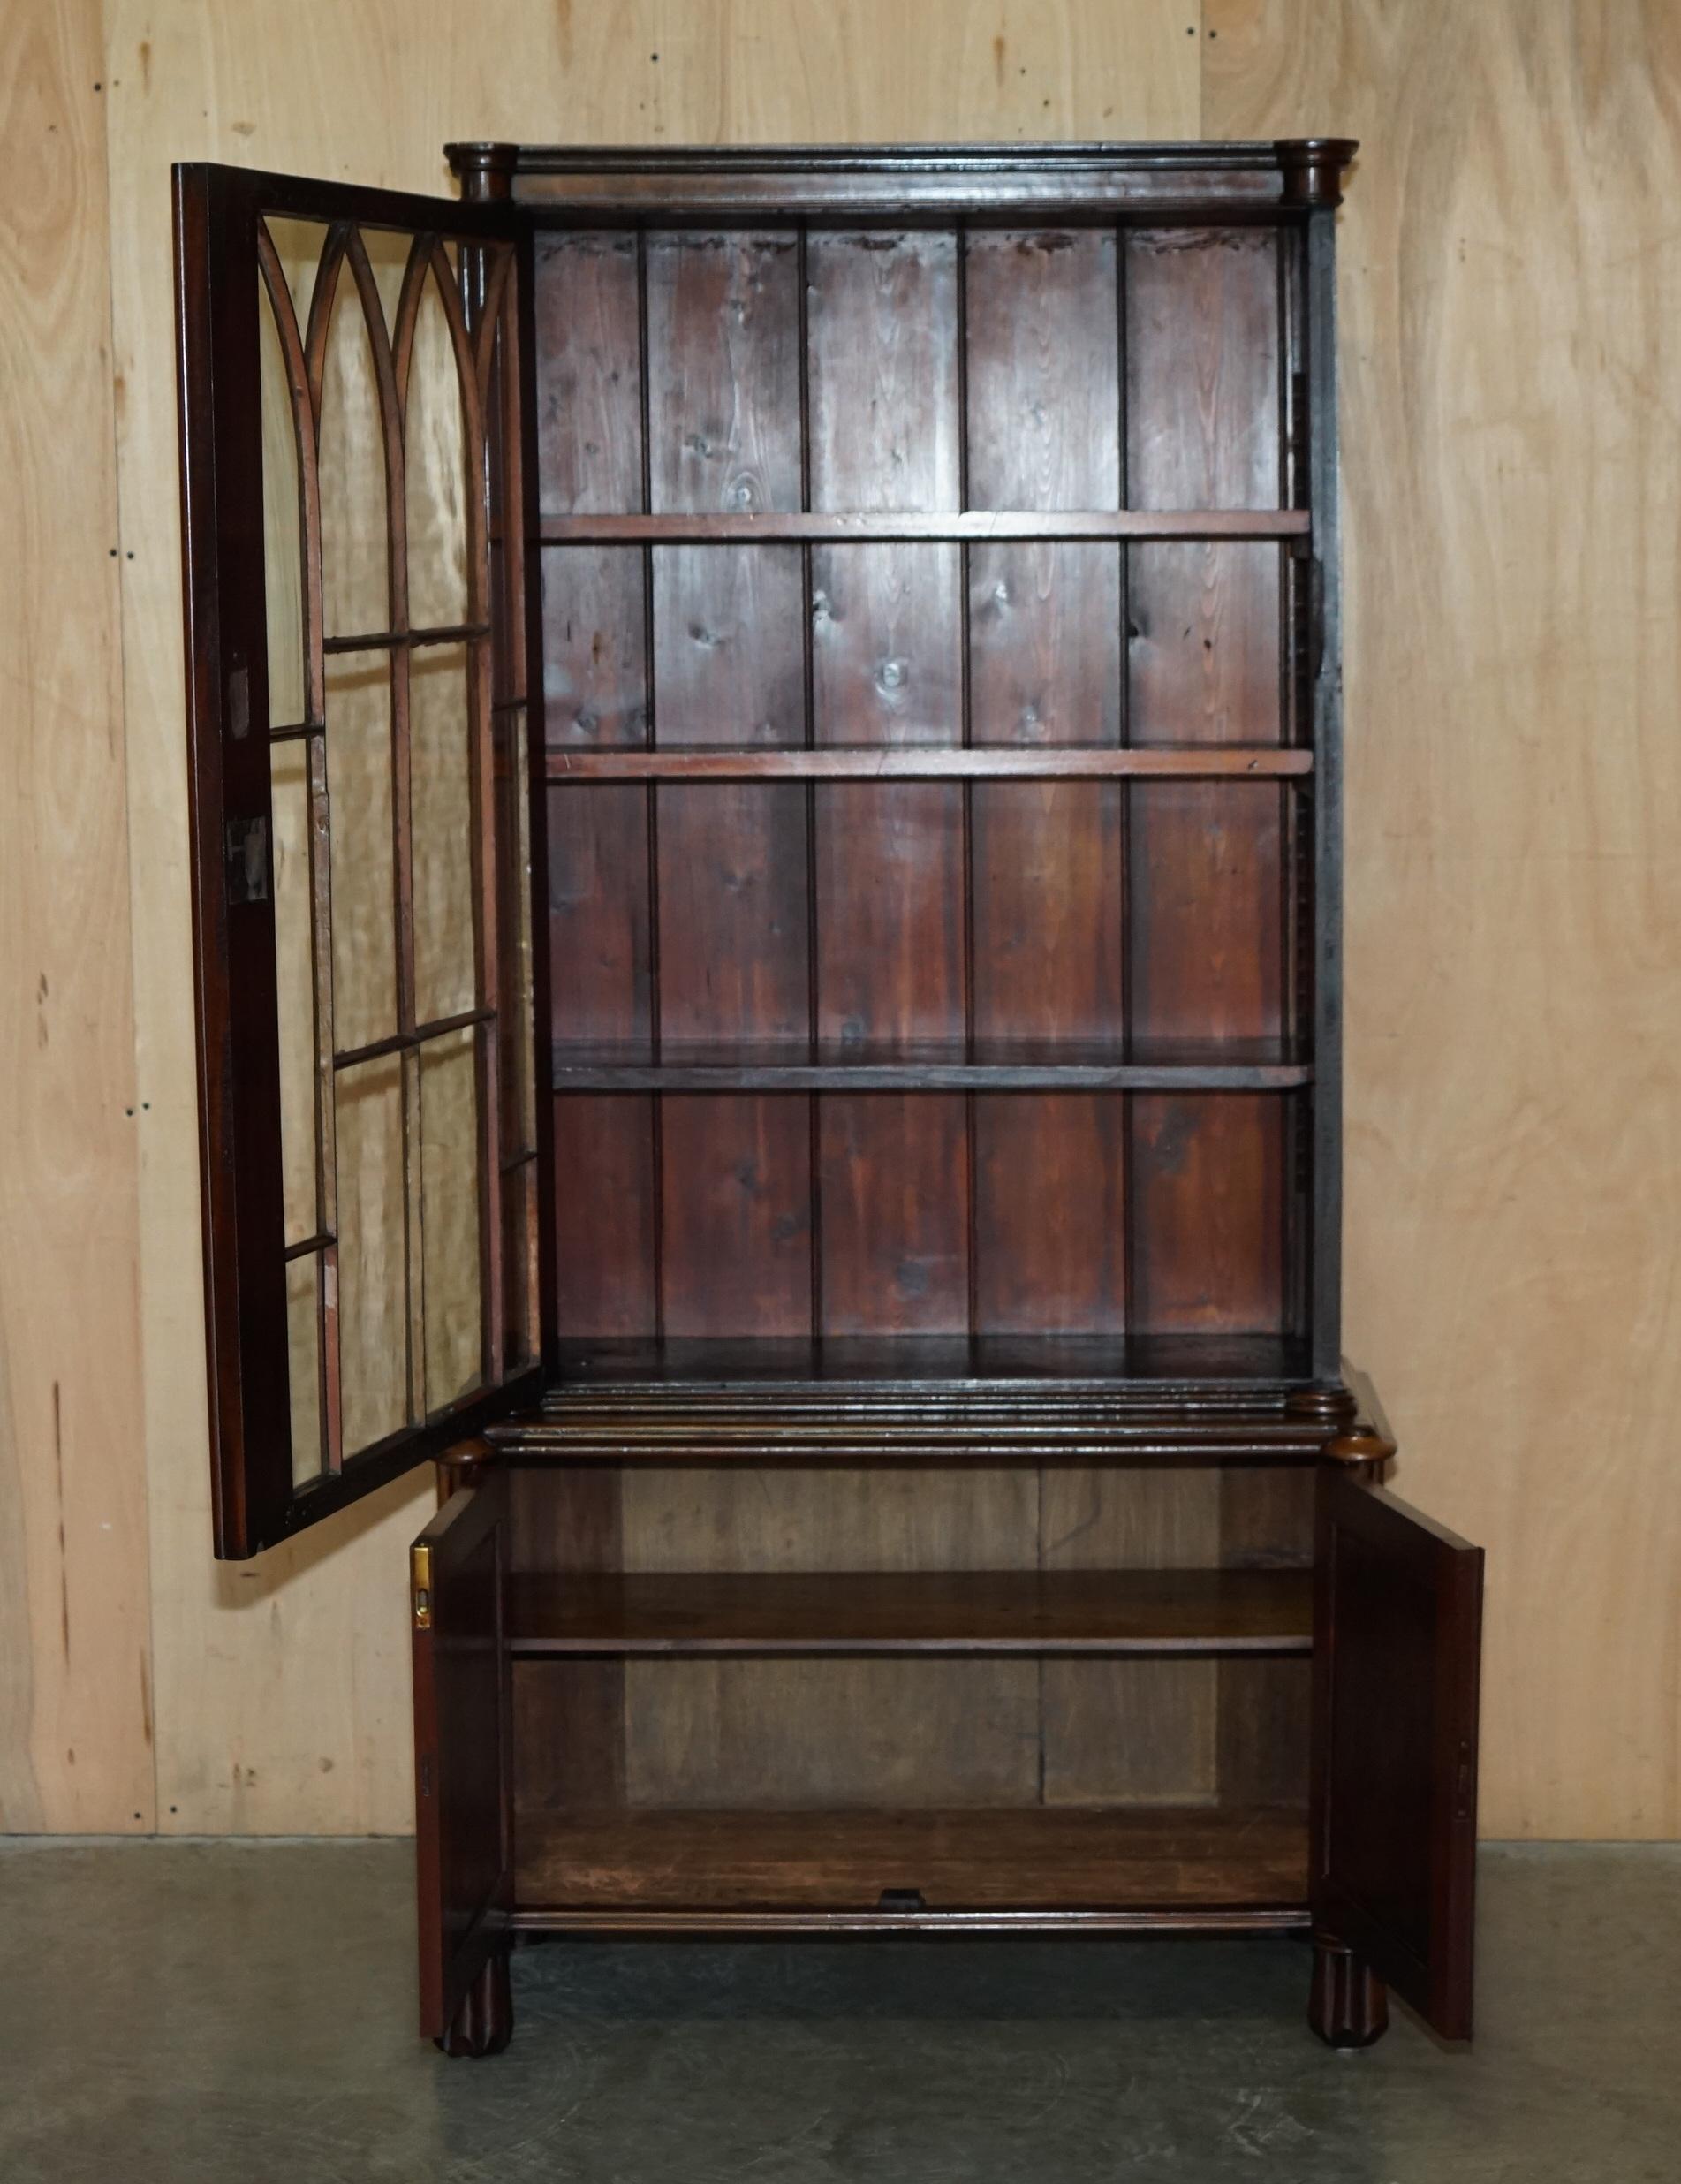 EARLY VICTORIAN GOTHiC REVIVAL ASTRAL GLAZED LIBRARY BOOKCASE WITH STEEPLE GLASS For Sale 6